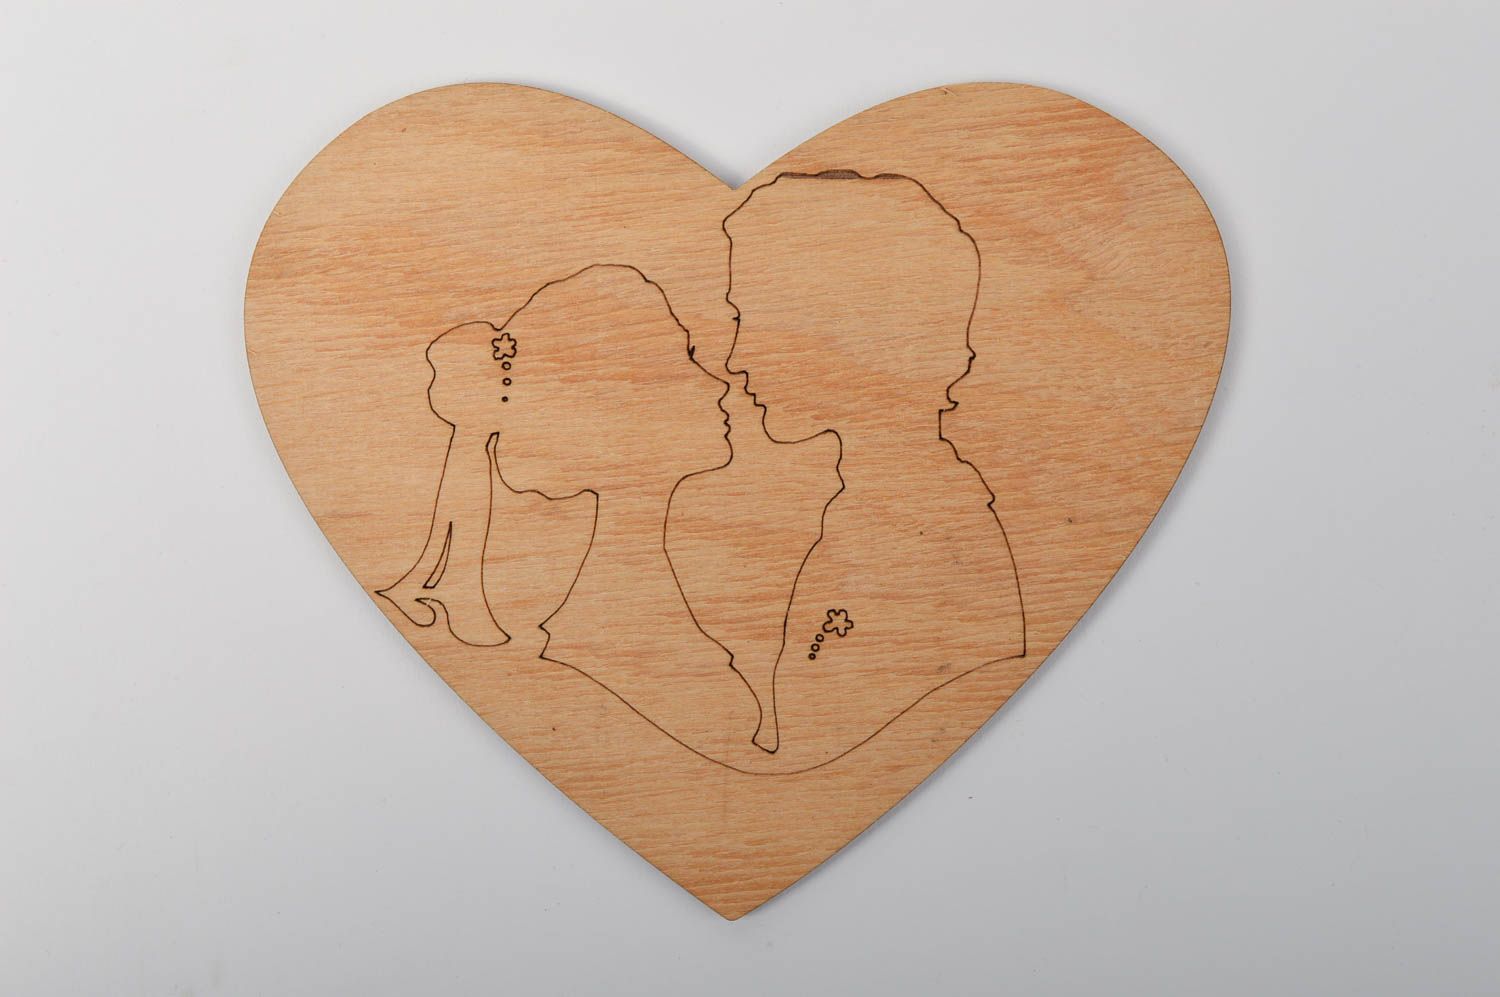 Unfinished Wooden Heart Crafts, Wooden Scrapbooking Crafts